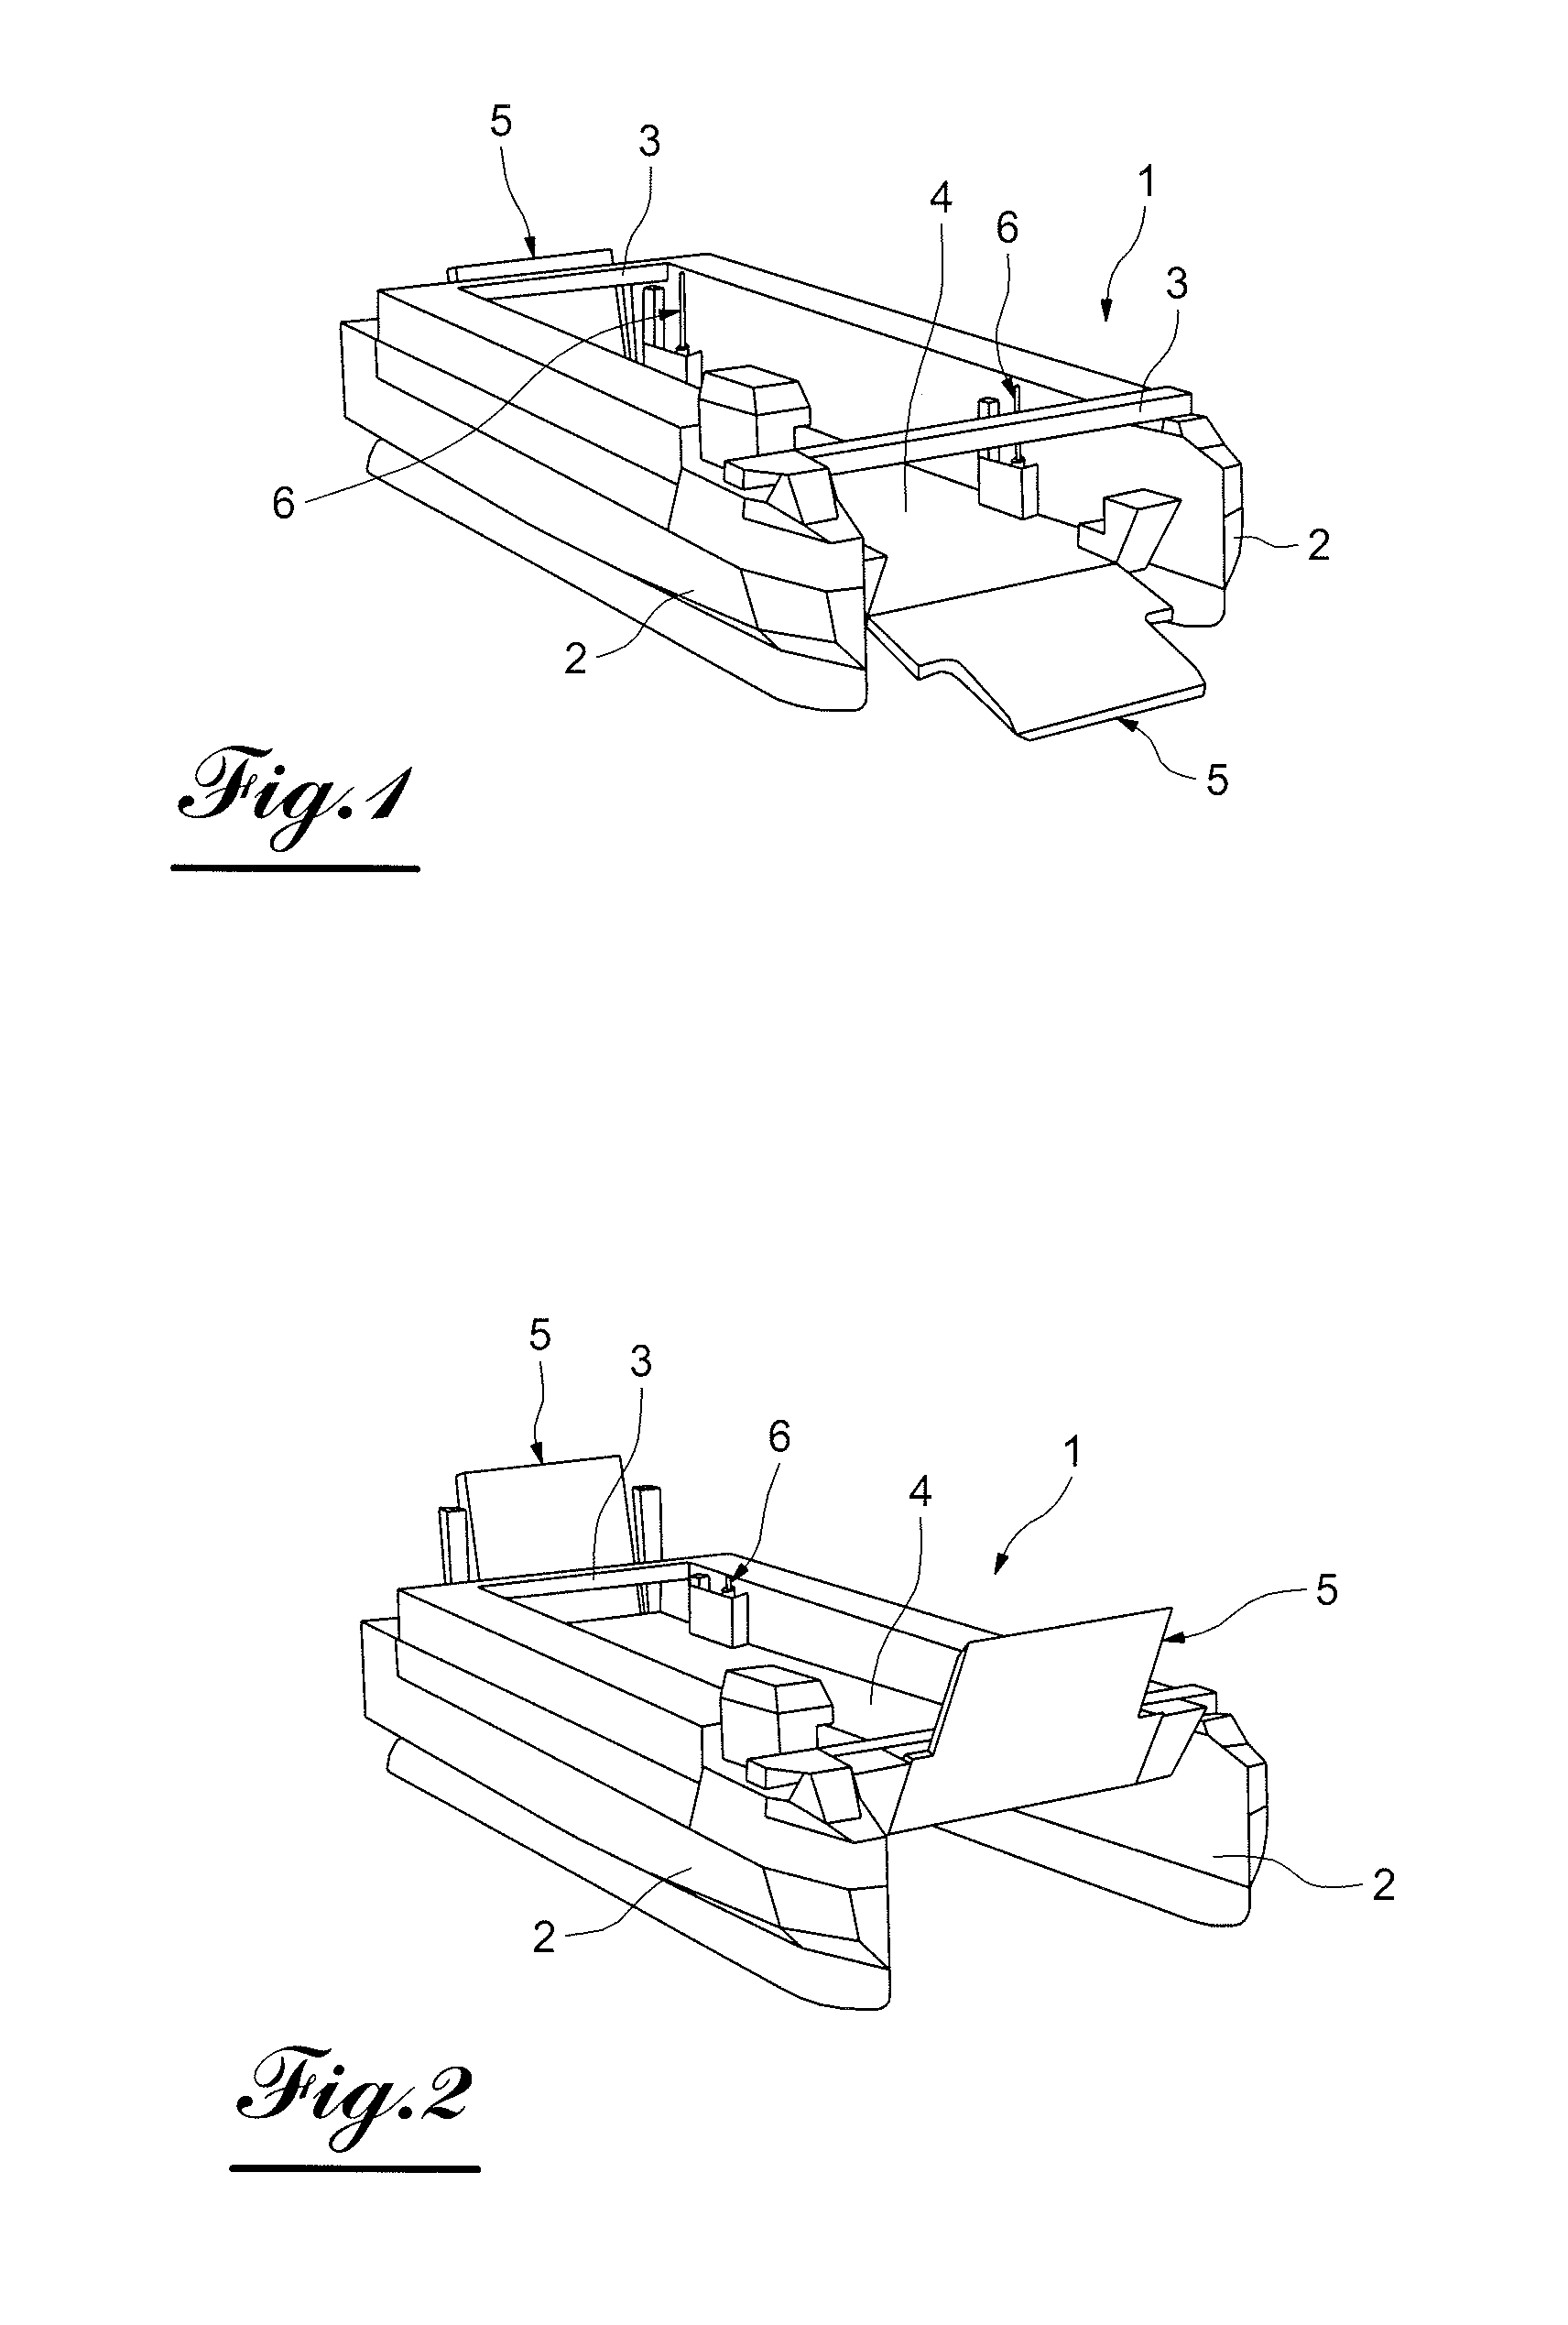 Catamaran vessel with hybrid propulsion for embarking and disembarking loads